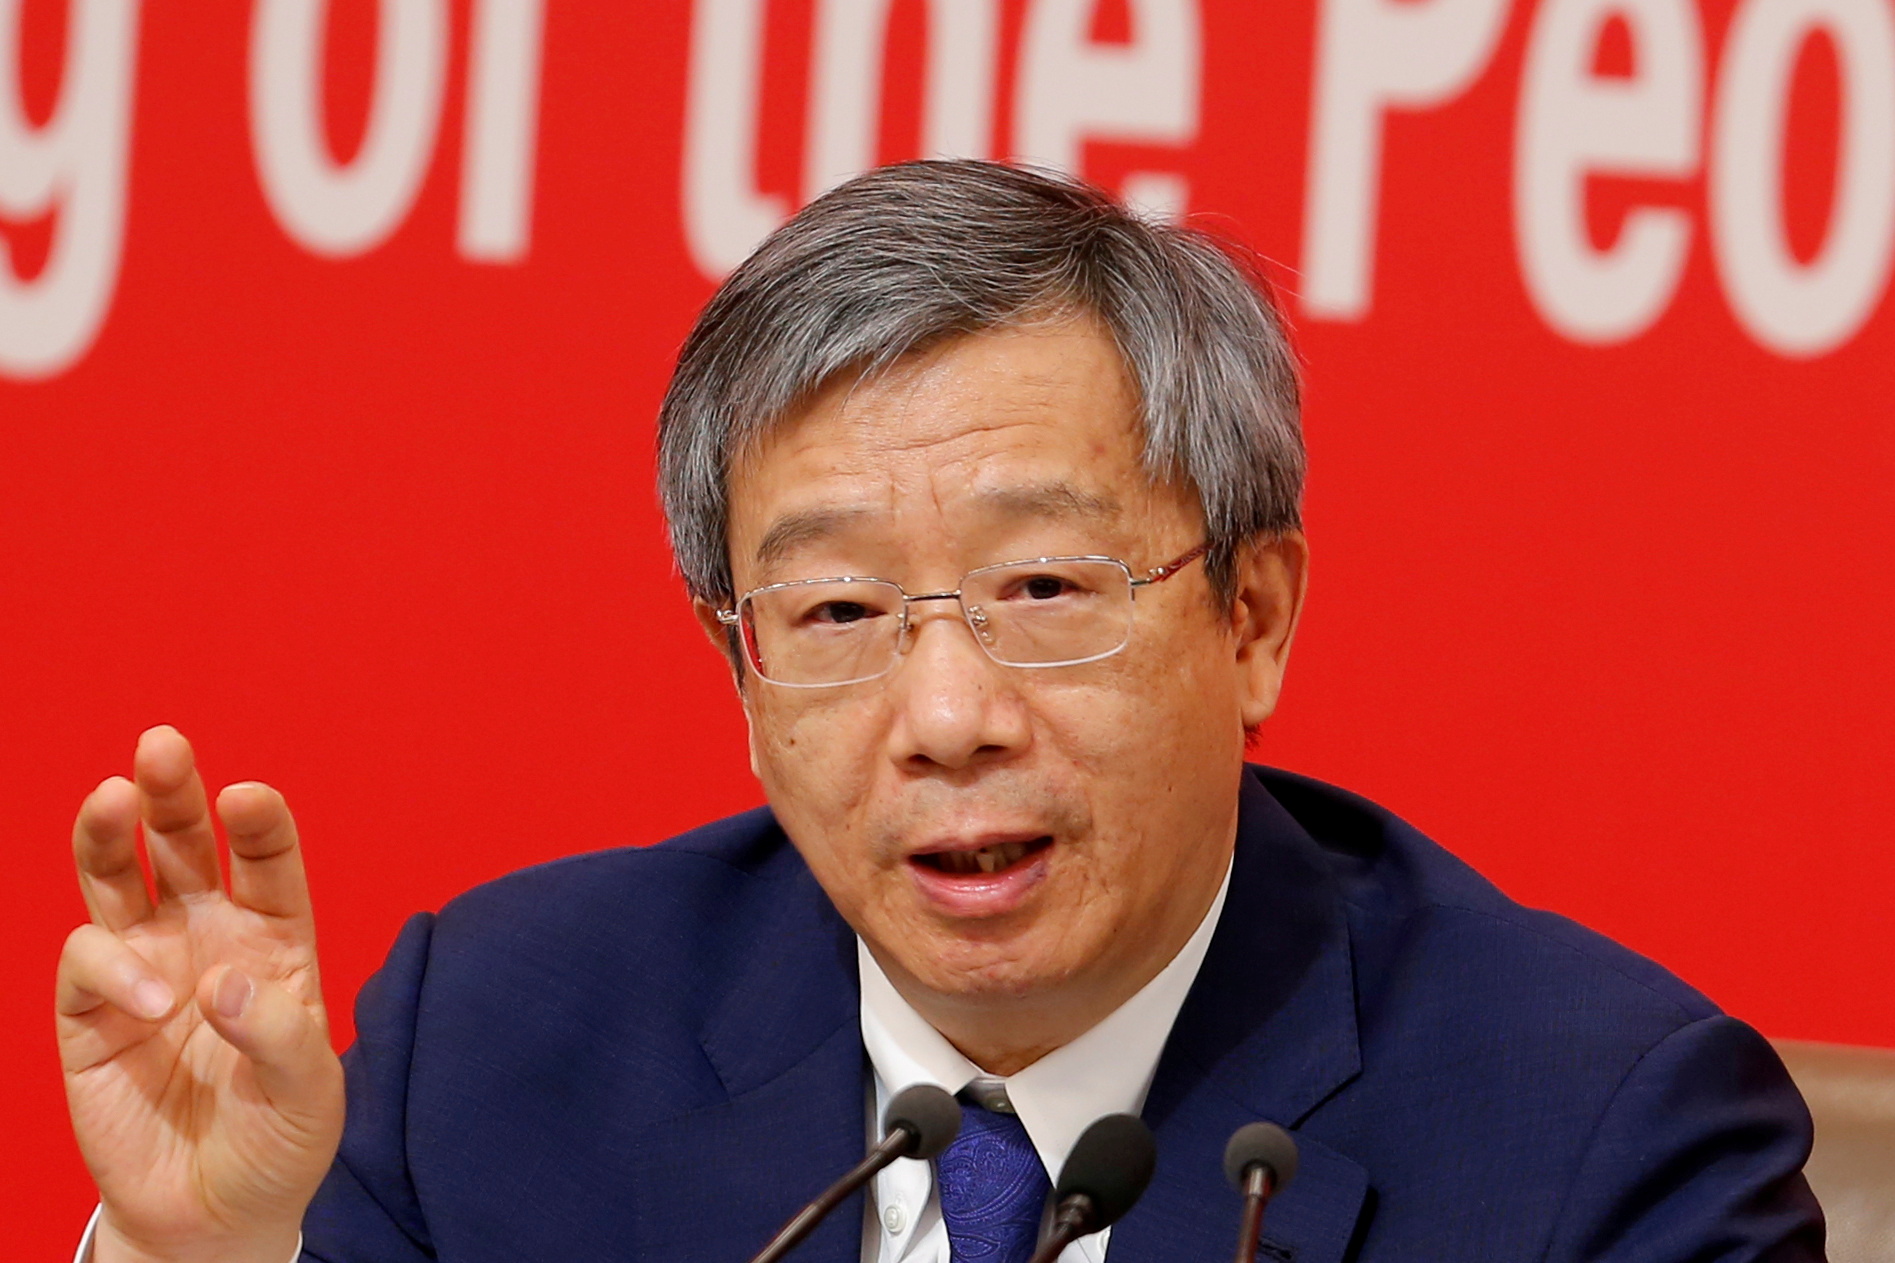 Governor of People's Bank of China (PBOC) Yi Gang attends a news conference on China's economic development ahead of the 70th anniversary of its founding, in Beijing, China September 24, 2019. REUTERS/Florence Lo